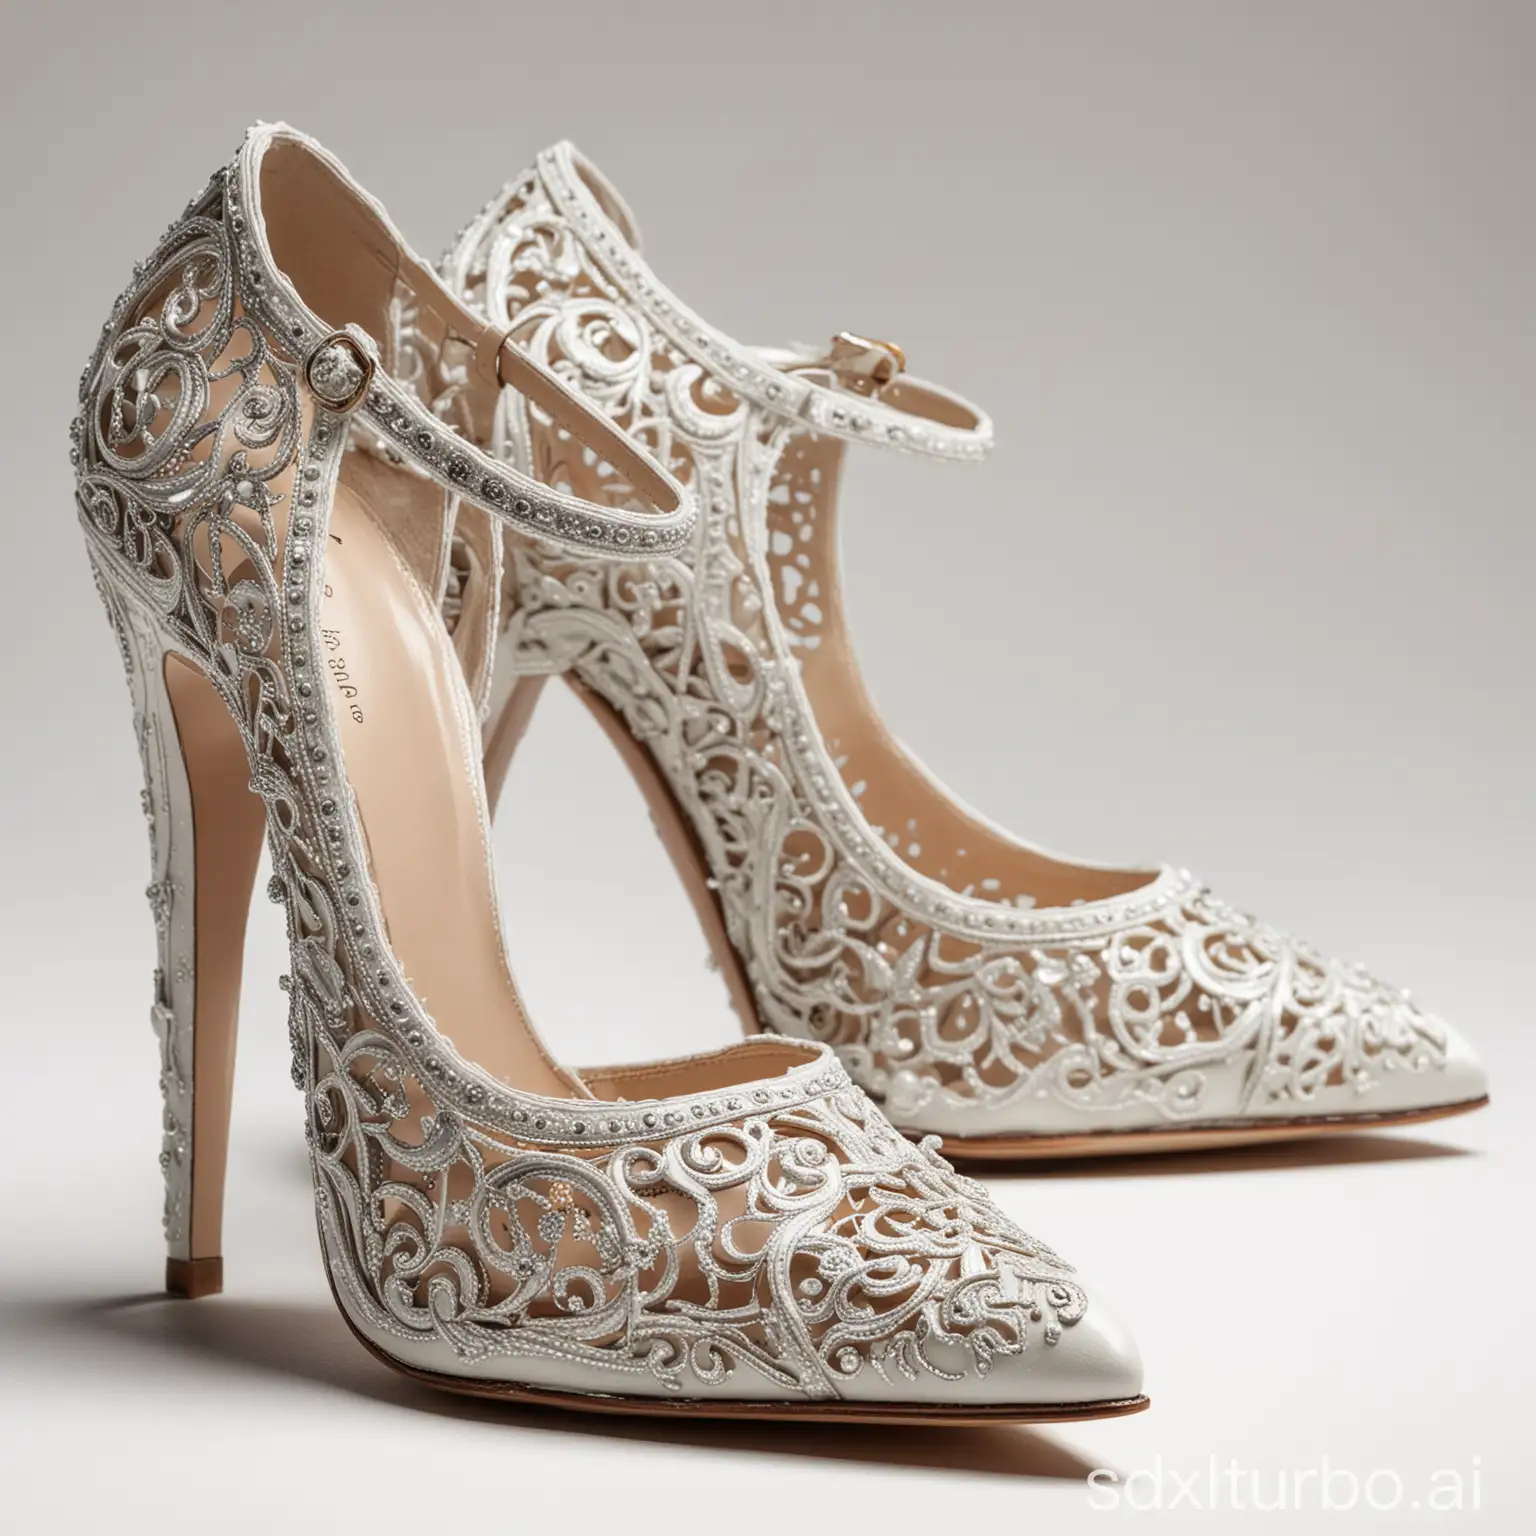 A close-up of a pair of designer shoes, showing the intricate details and luxurious materials. The shoes are placed on a white background, which allows them to stand out and capture the viewer's attention.